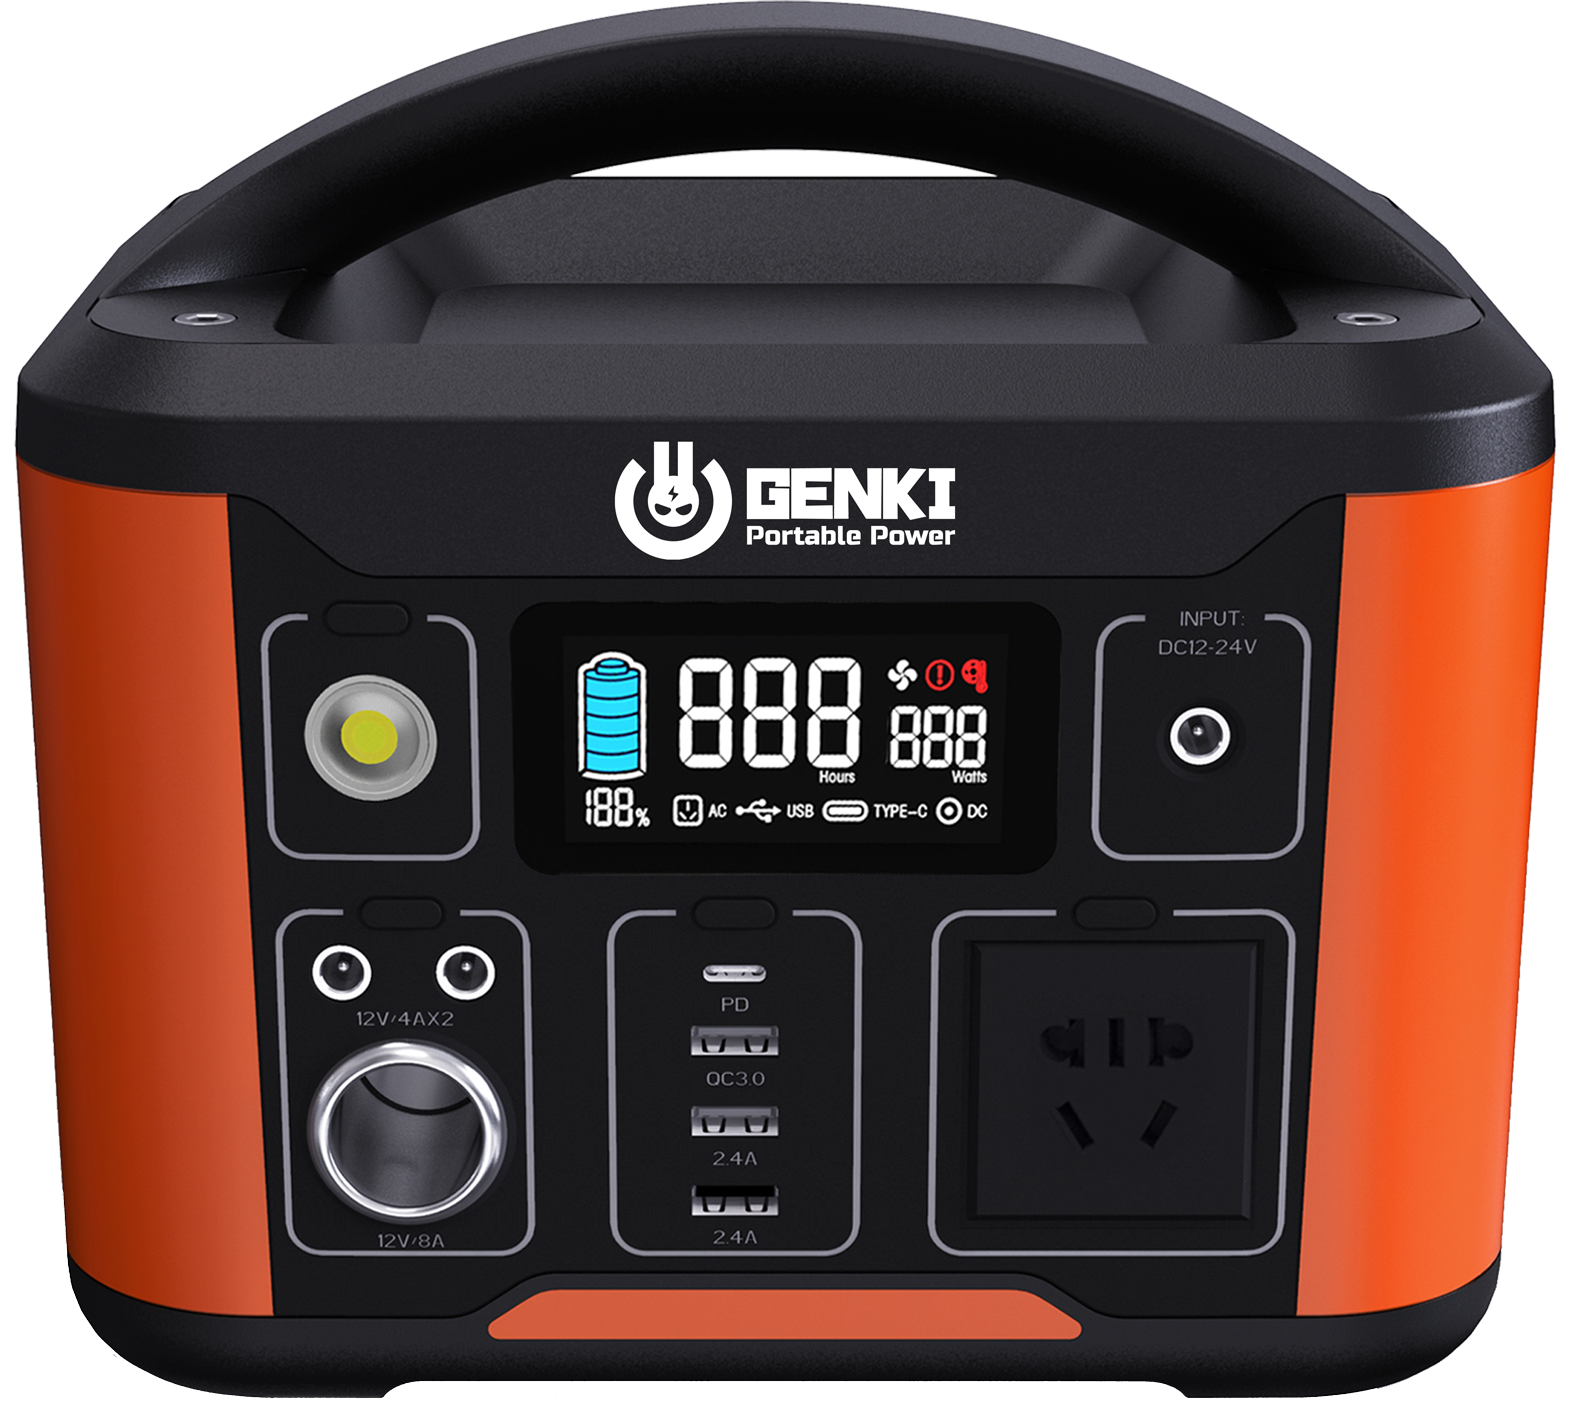 Genki portable power station for camping 300W